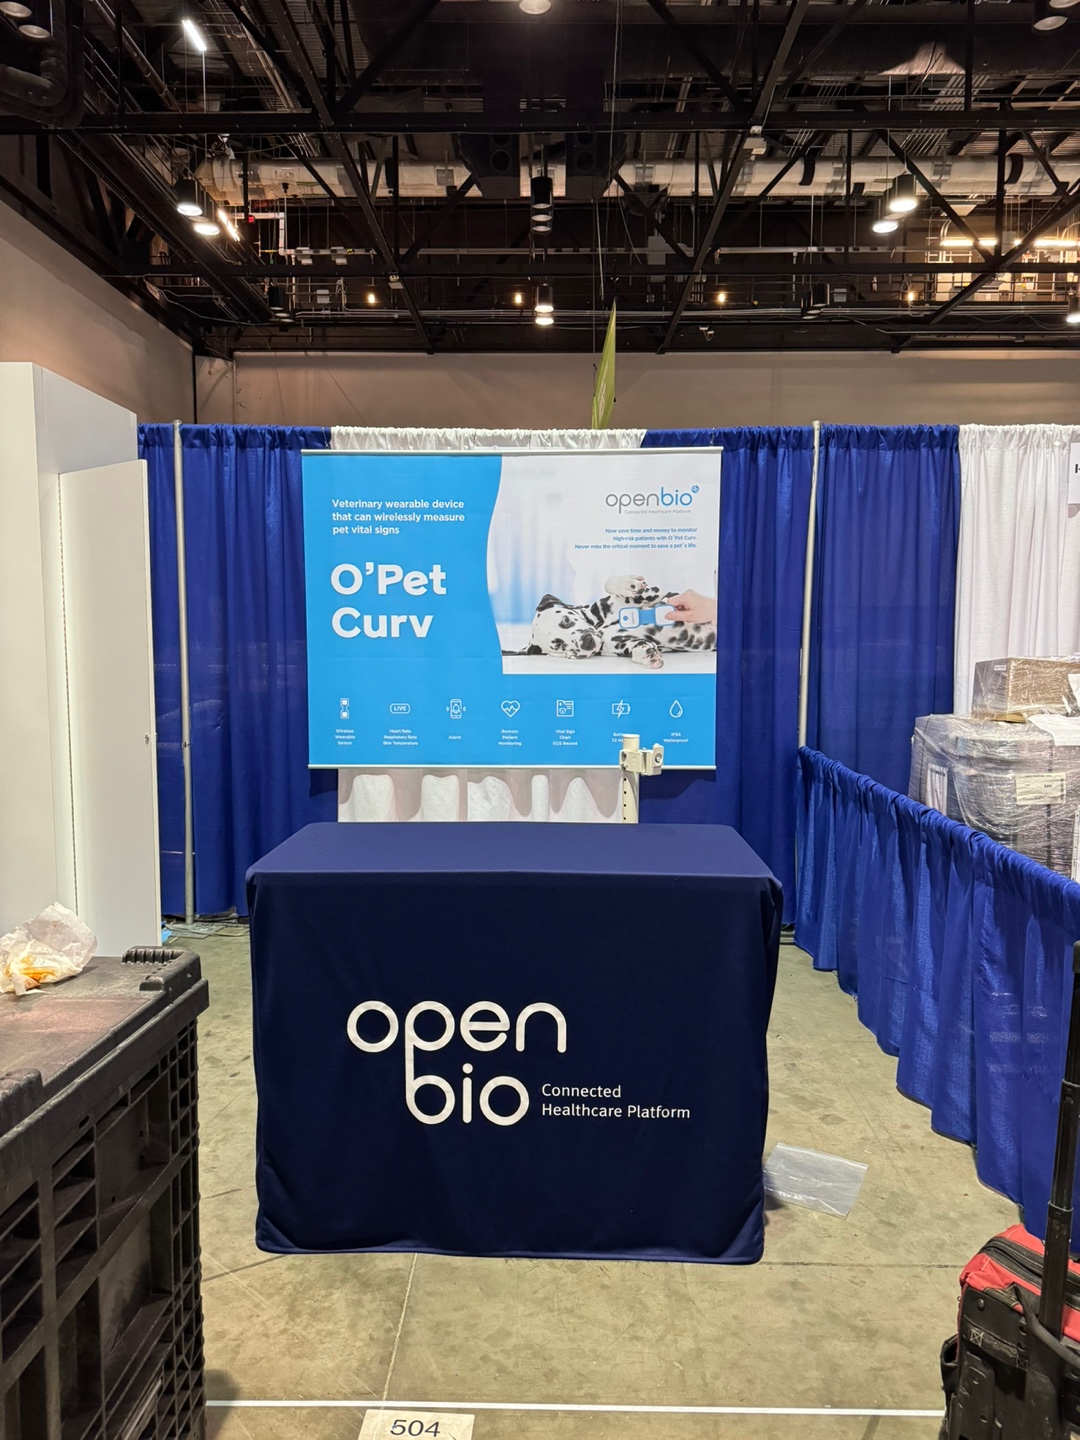 Setting up an open bio booth